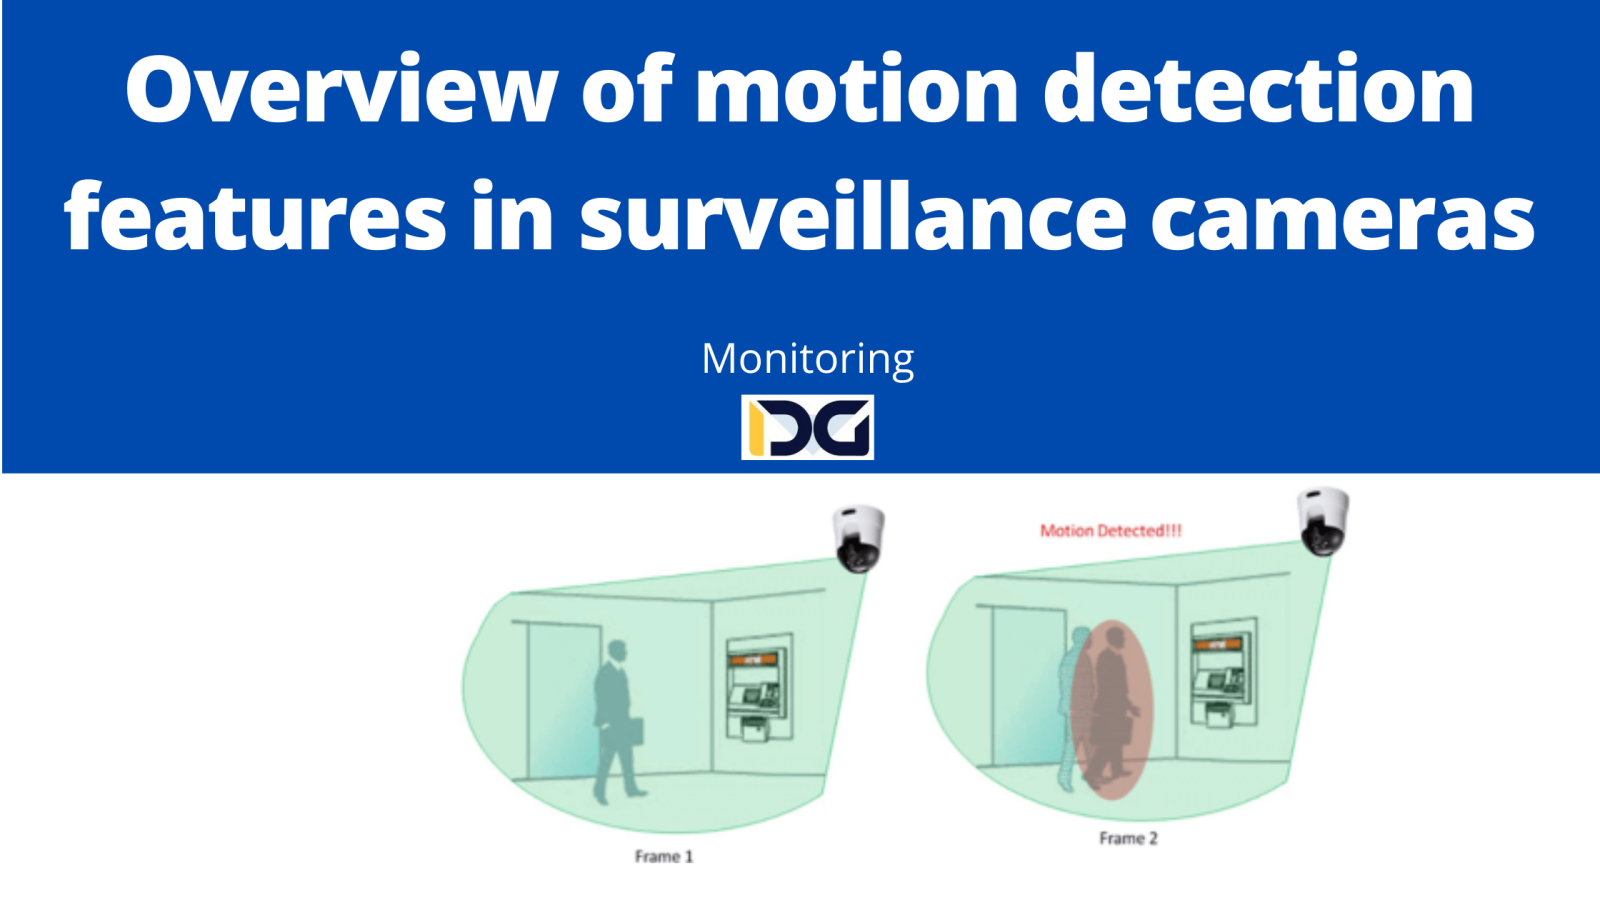 Overview of motion detection features in surveillance cameras